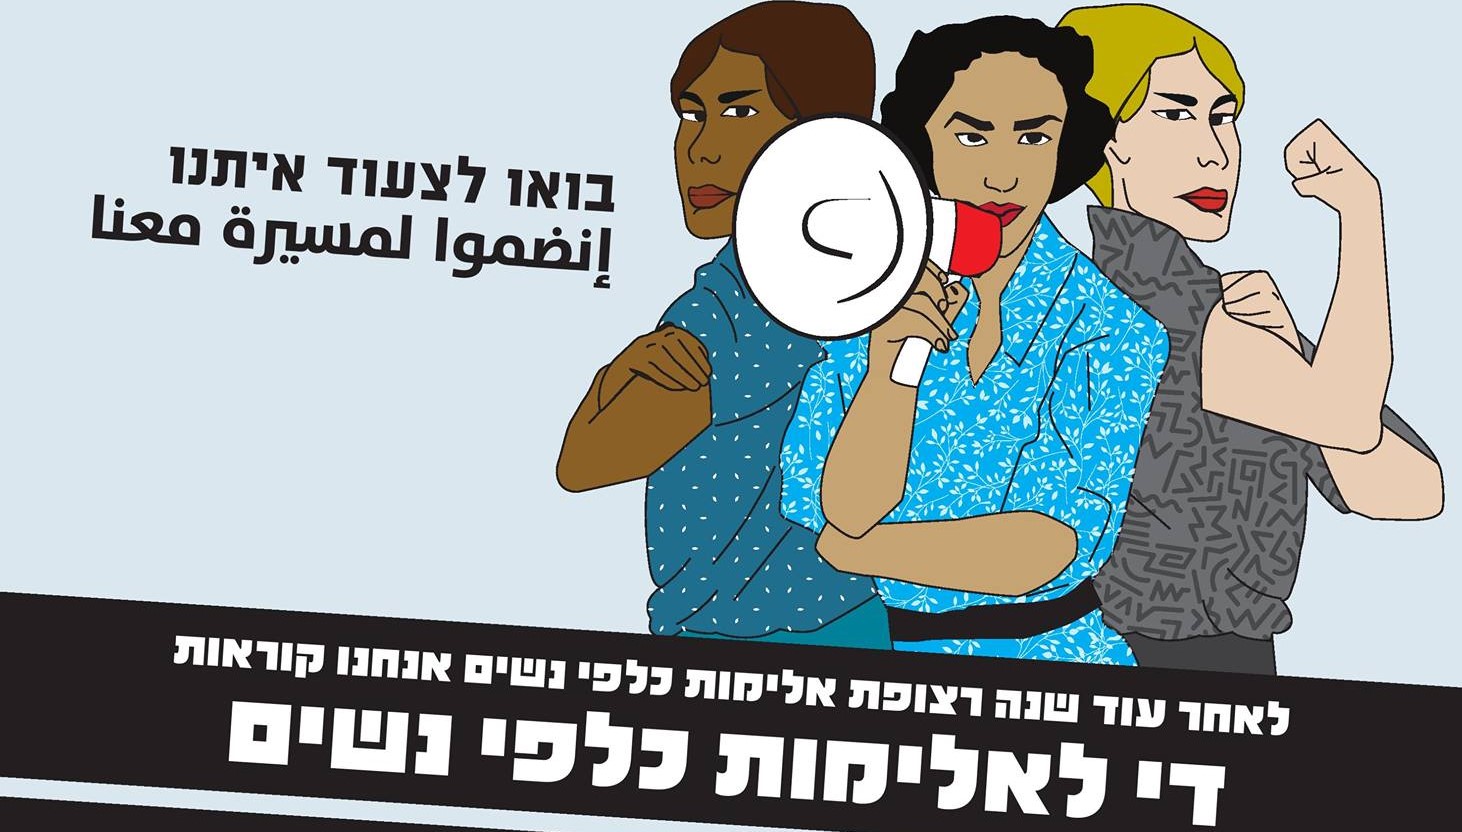 An advertisement to join today's march in Tel Aviv: Above, in Hebrew and Arabic it reads: "Come join us and march," and below, in Hebrew: "After yet another year full of brutality towards women we're calling out 'Enough violence towards women."